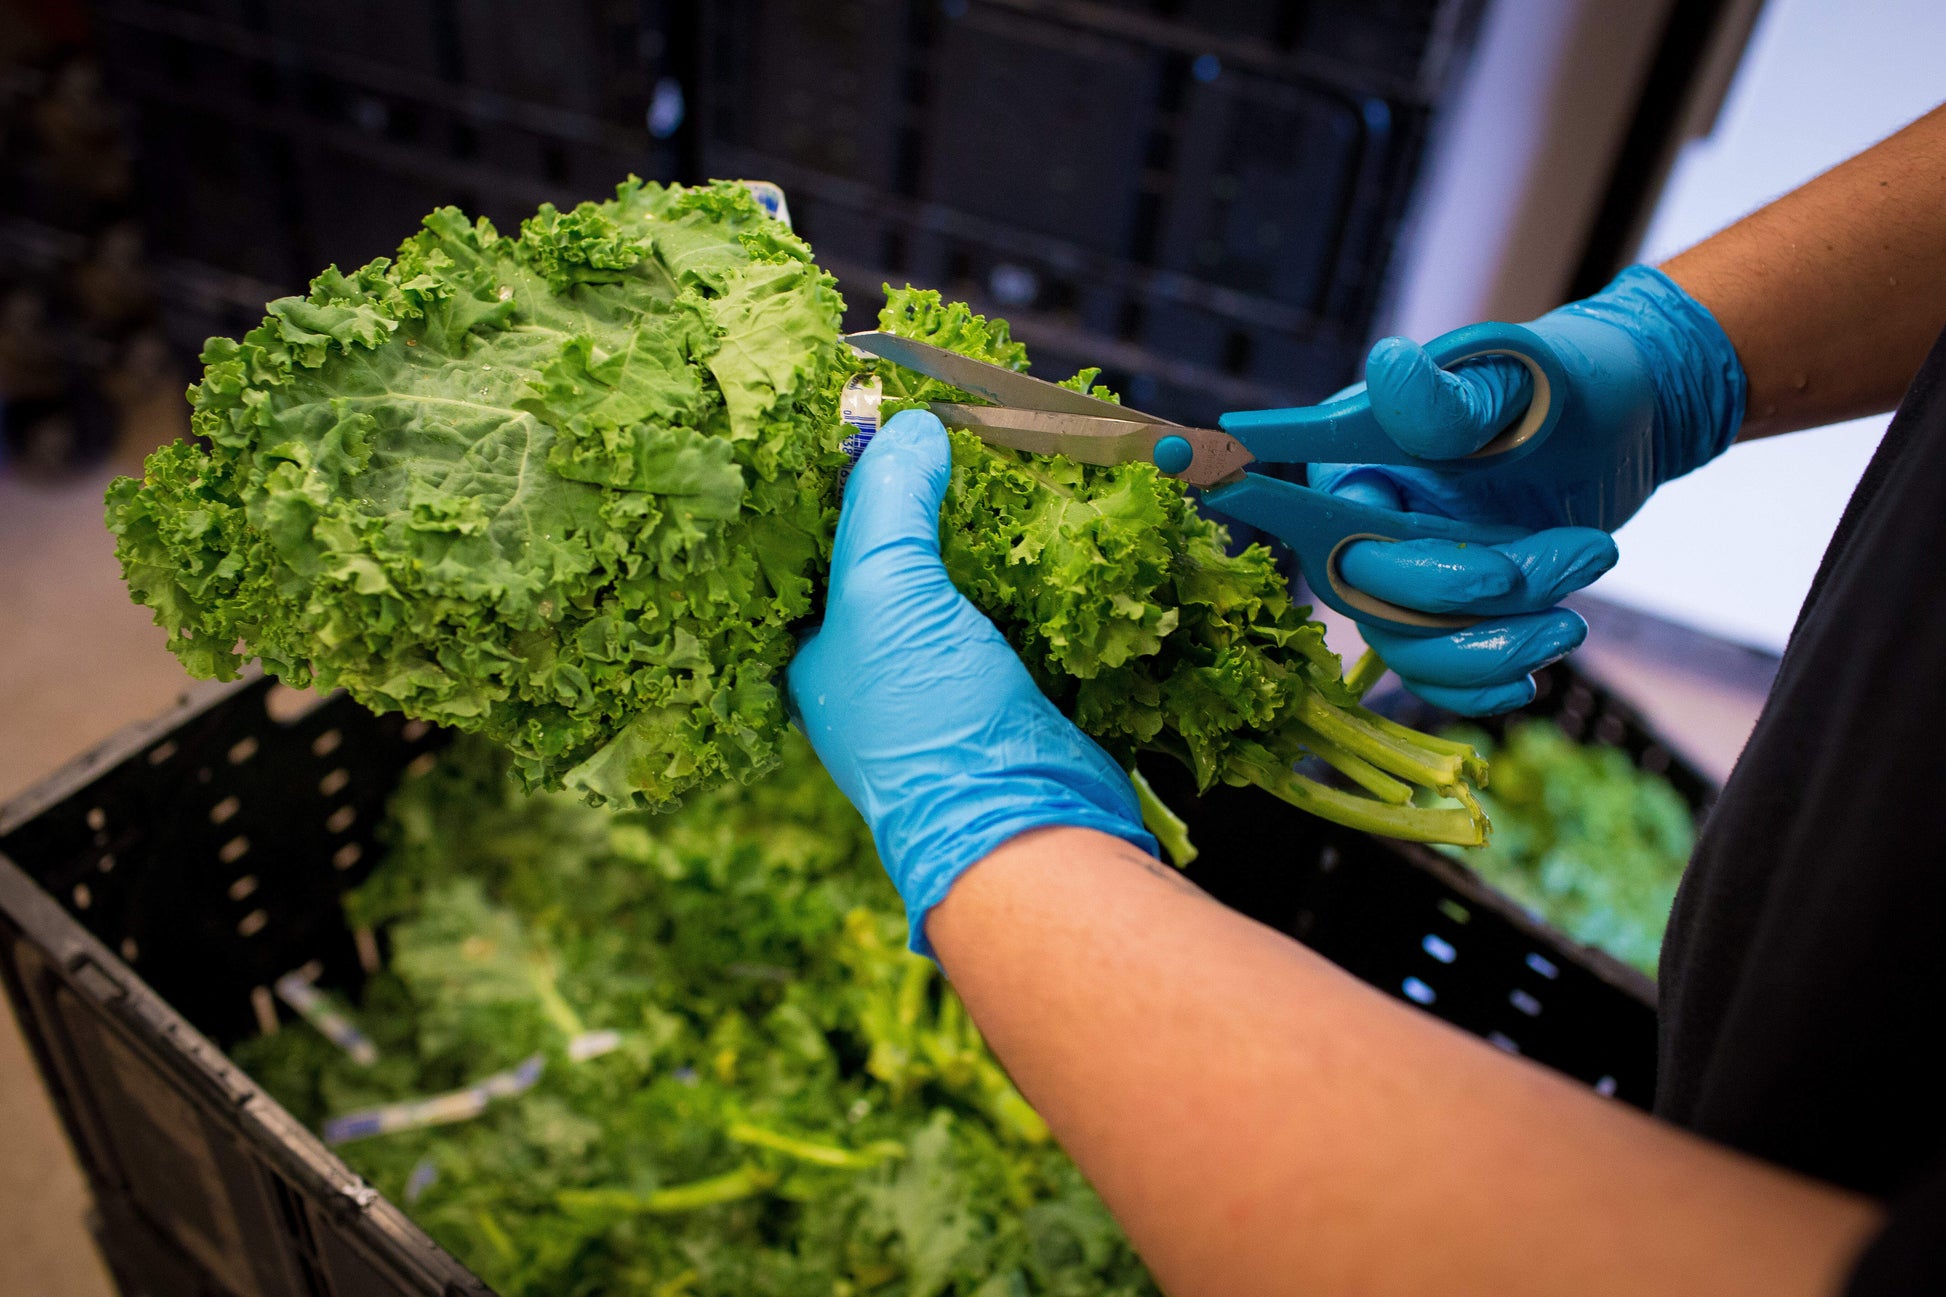 Hand in lab gloves carefully cutting the sealer of neatly bundled USDA-certified kale packs, with more bulk kale organized in vegetable plastic boxes in the background.